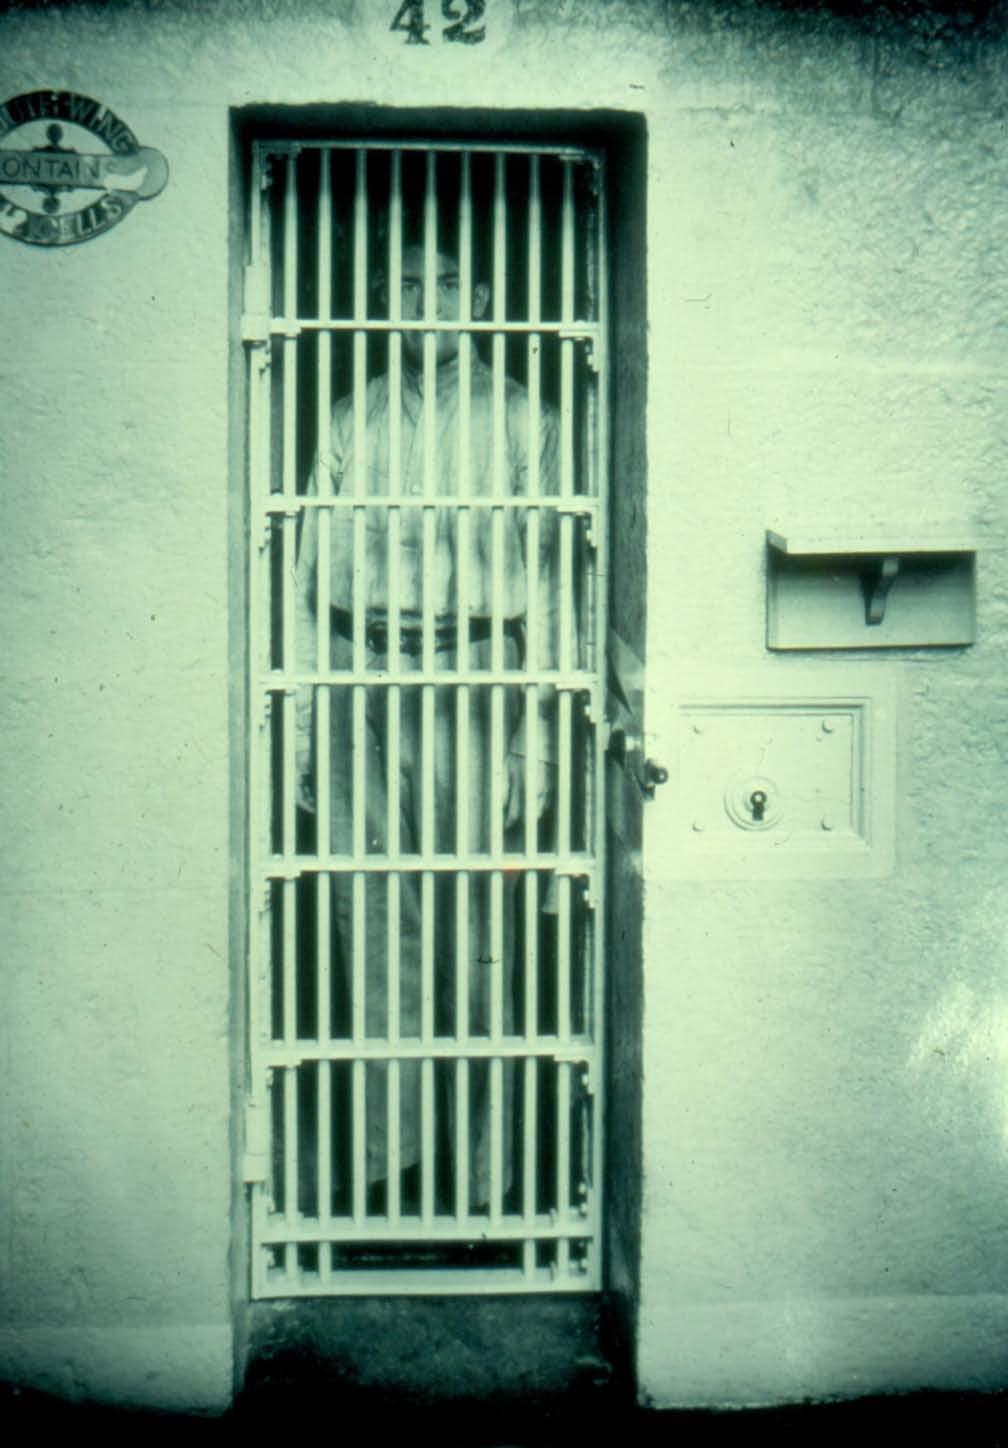 No longer were inmates lodged together but each locked in his own cell at night: 7 feet long, 7 feet high and 3 ½ feet